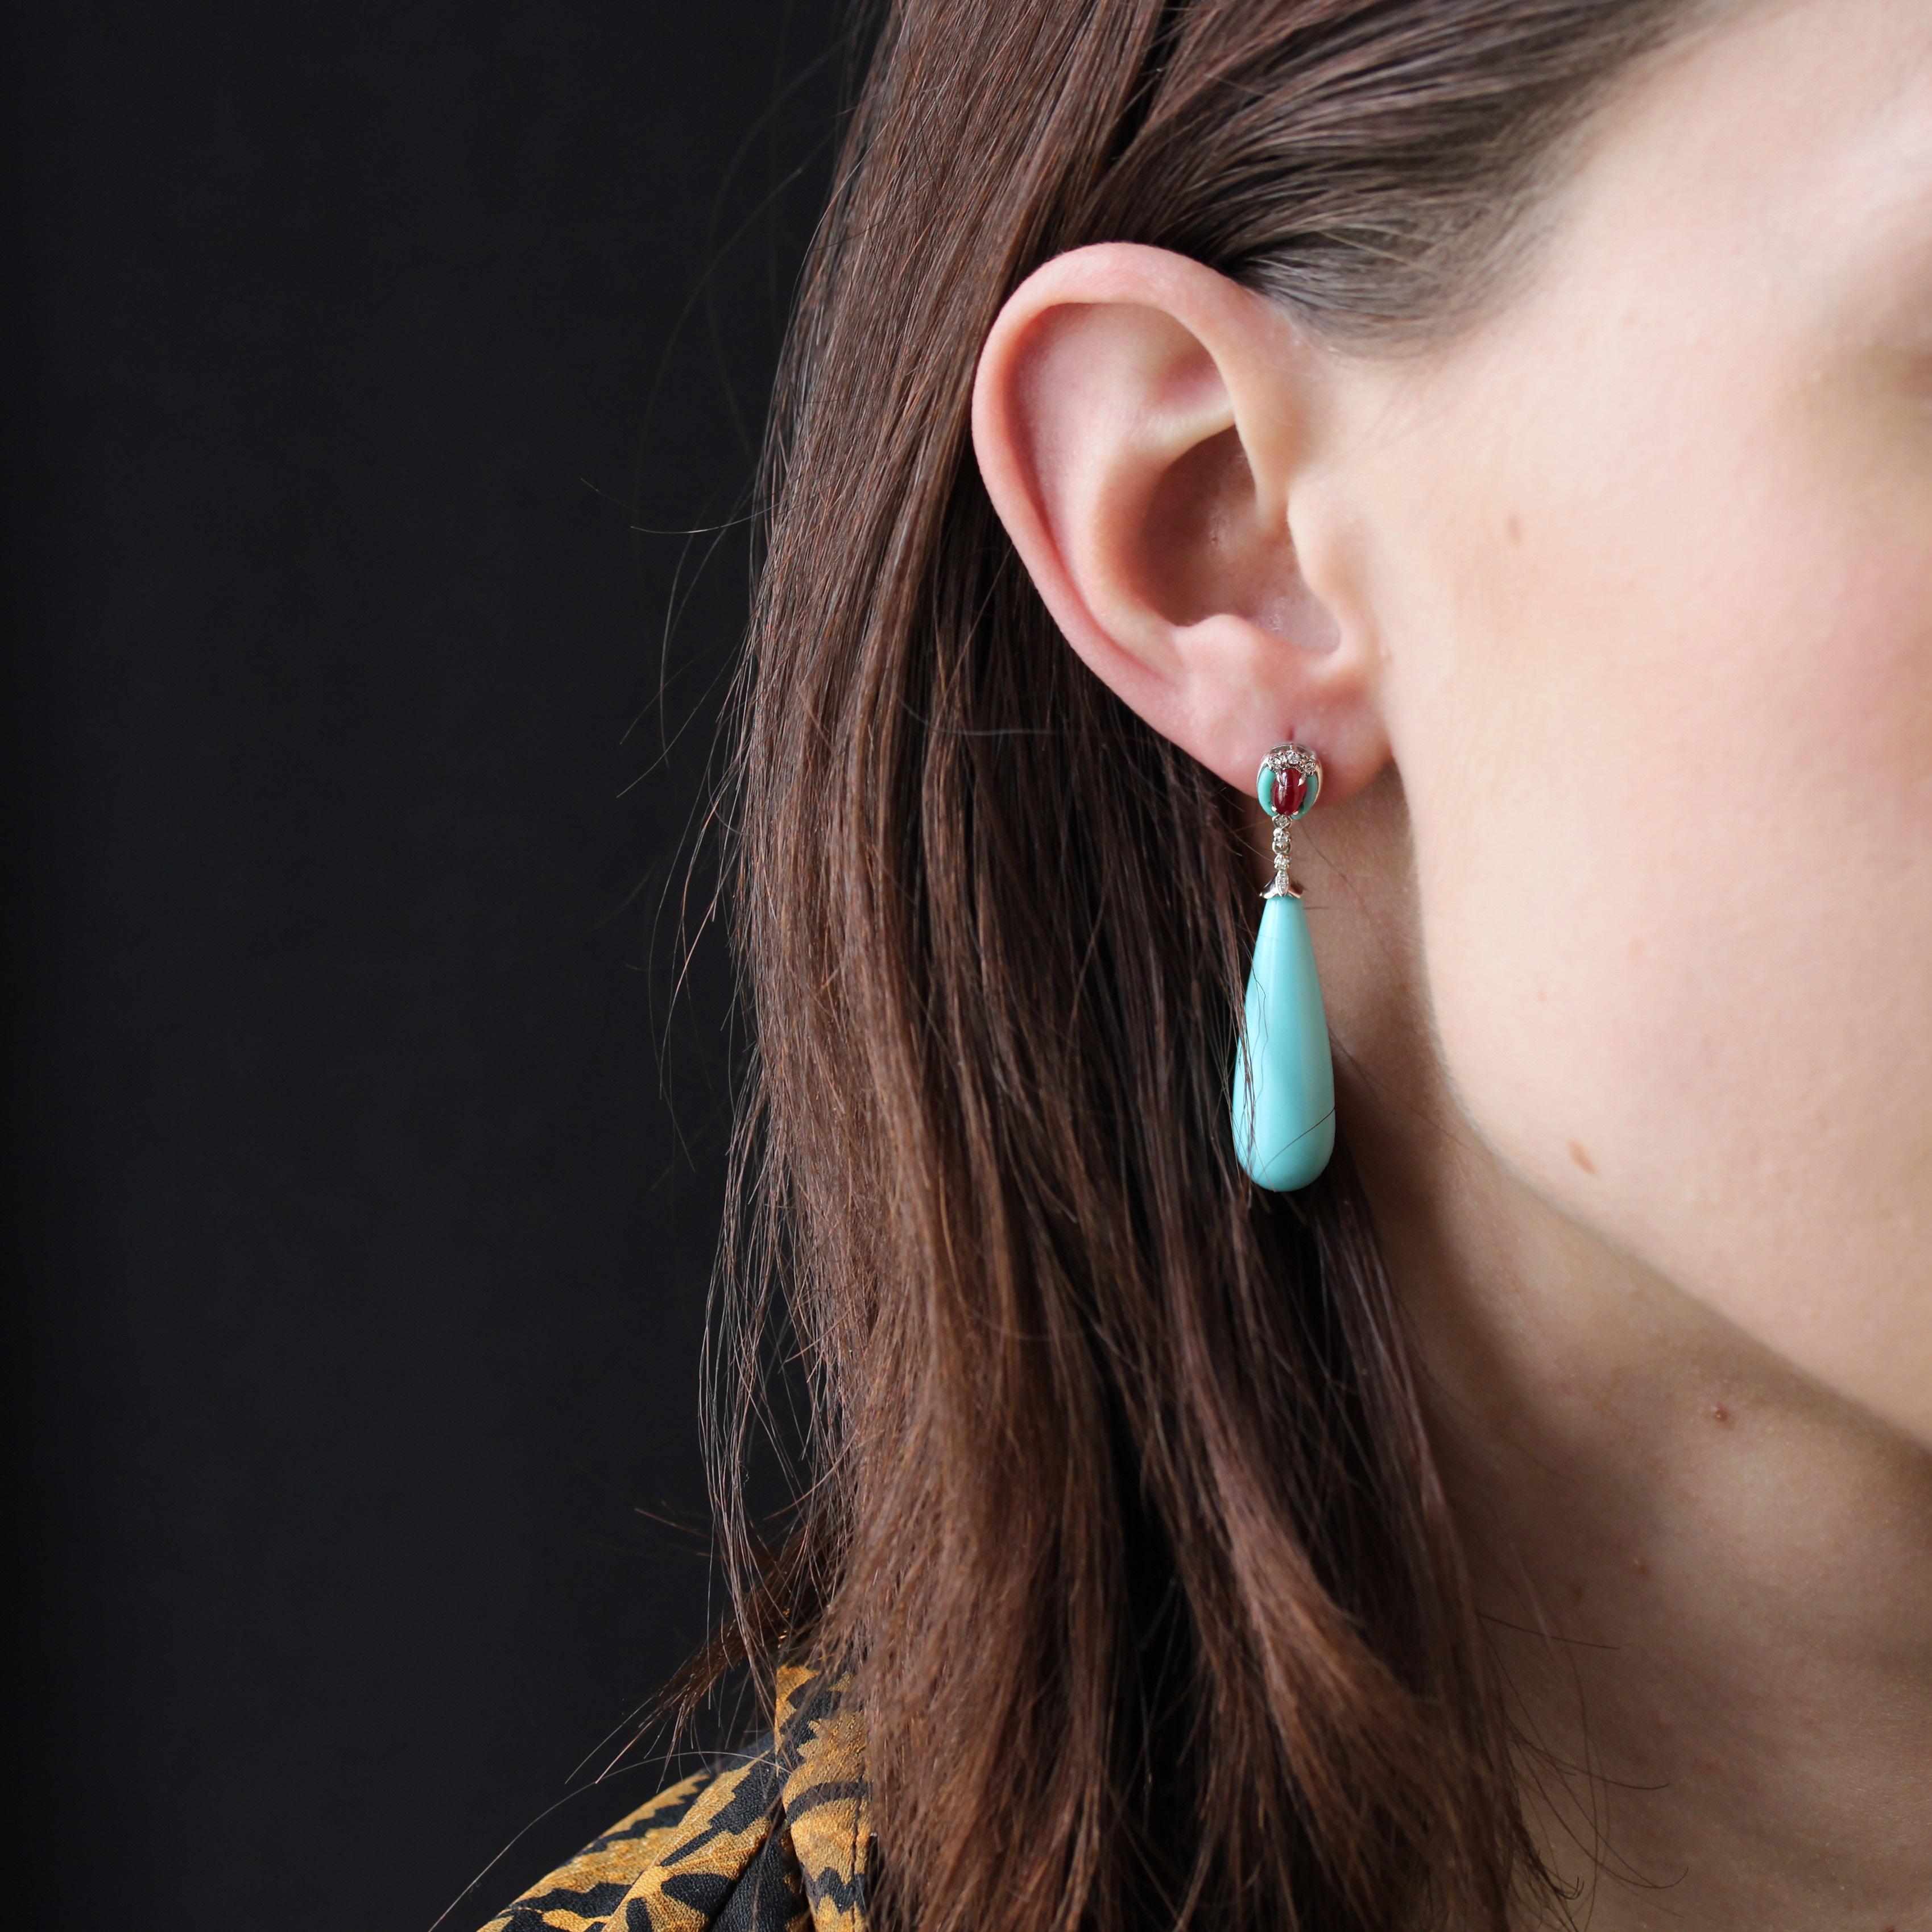 For pierced ears.
Earrings in 18 karat white gold.
Long and slender, these earrings feature an oval motif set in the center with a ruby cabochon flanked on either side by 2 half-moon-cut turquoise stones. Four modern brilliant-cut diamonds also